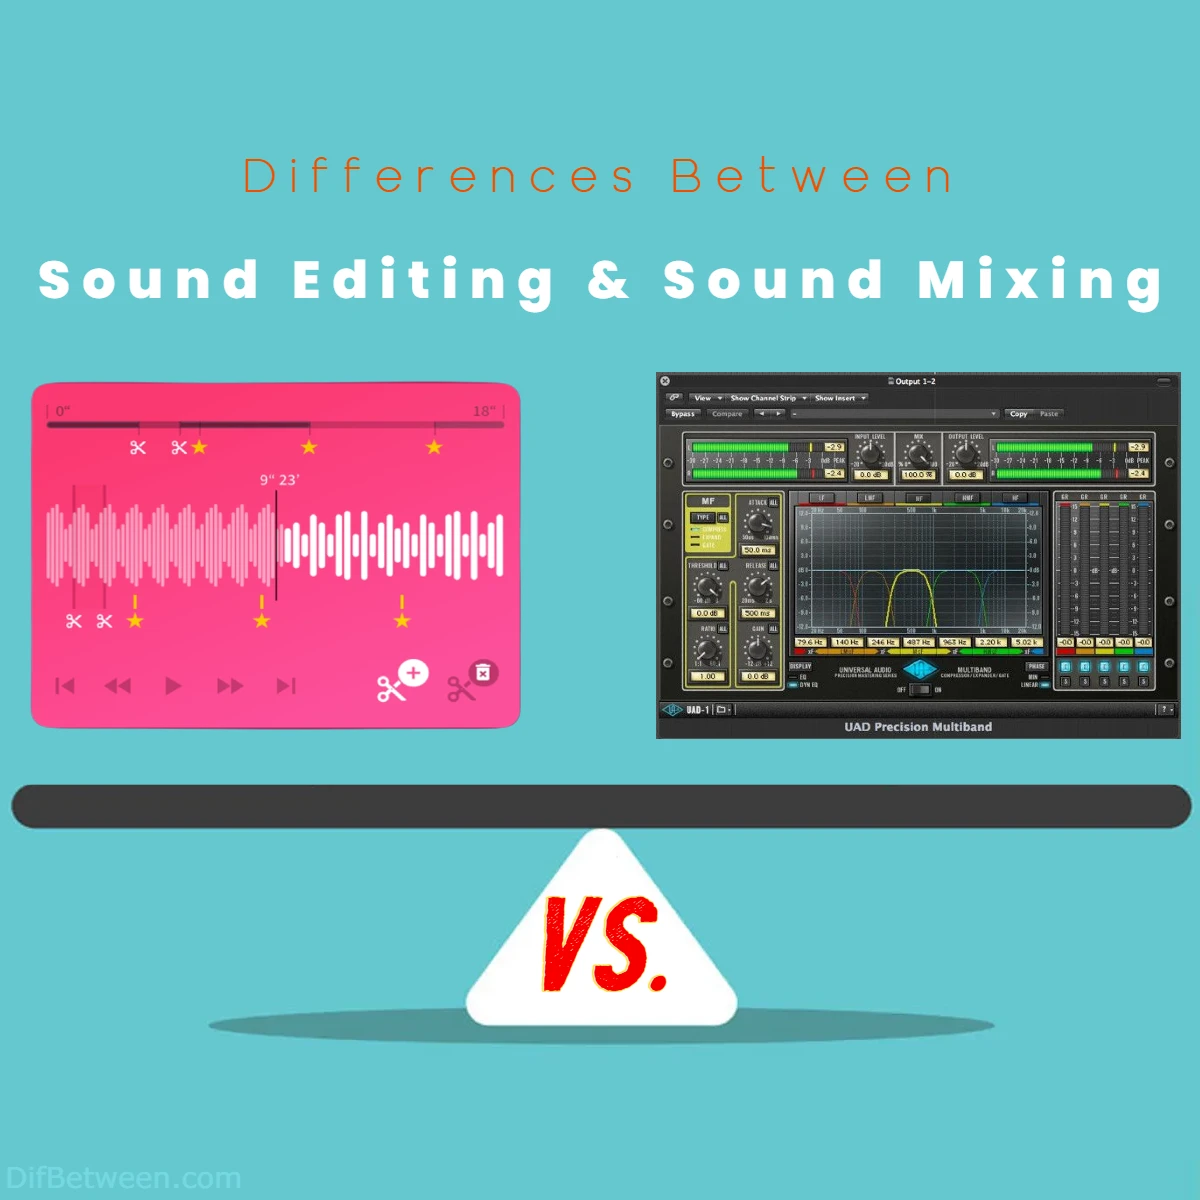 Differences Between Sound Editing vs Sound Mixing